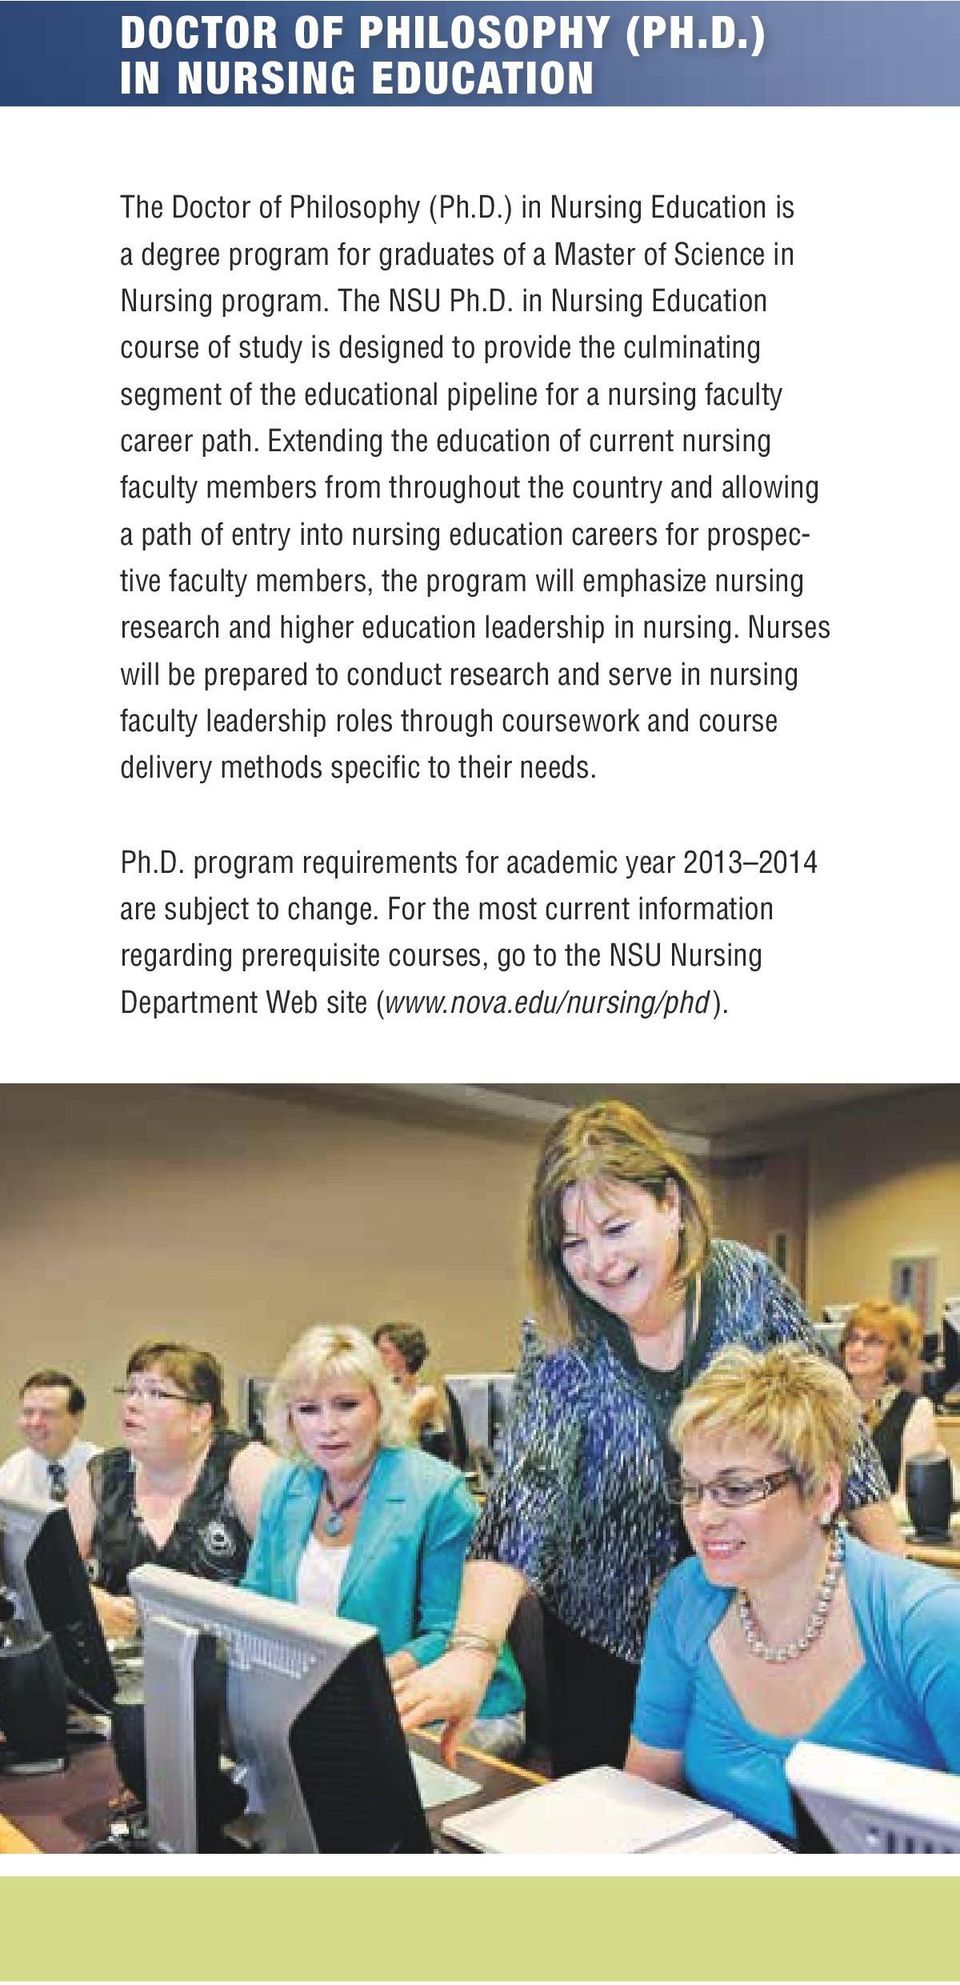 emphasize nursing research and higher education leadership in nursing.